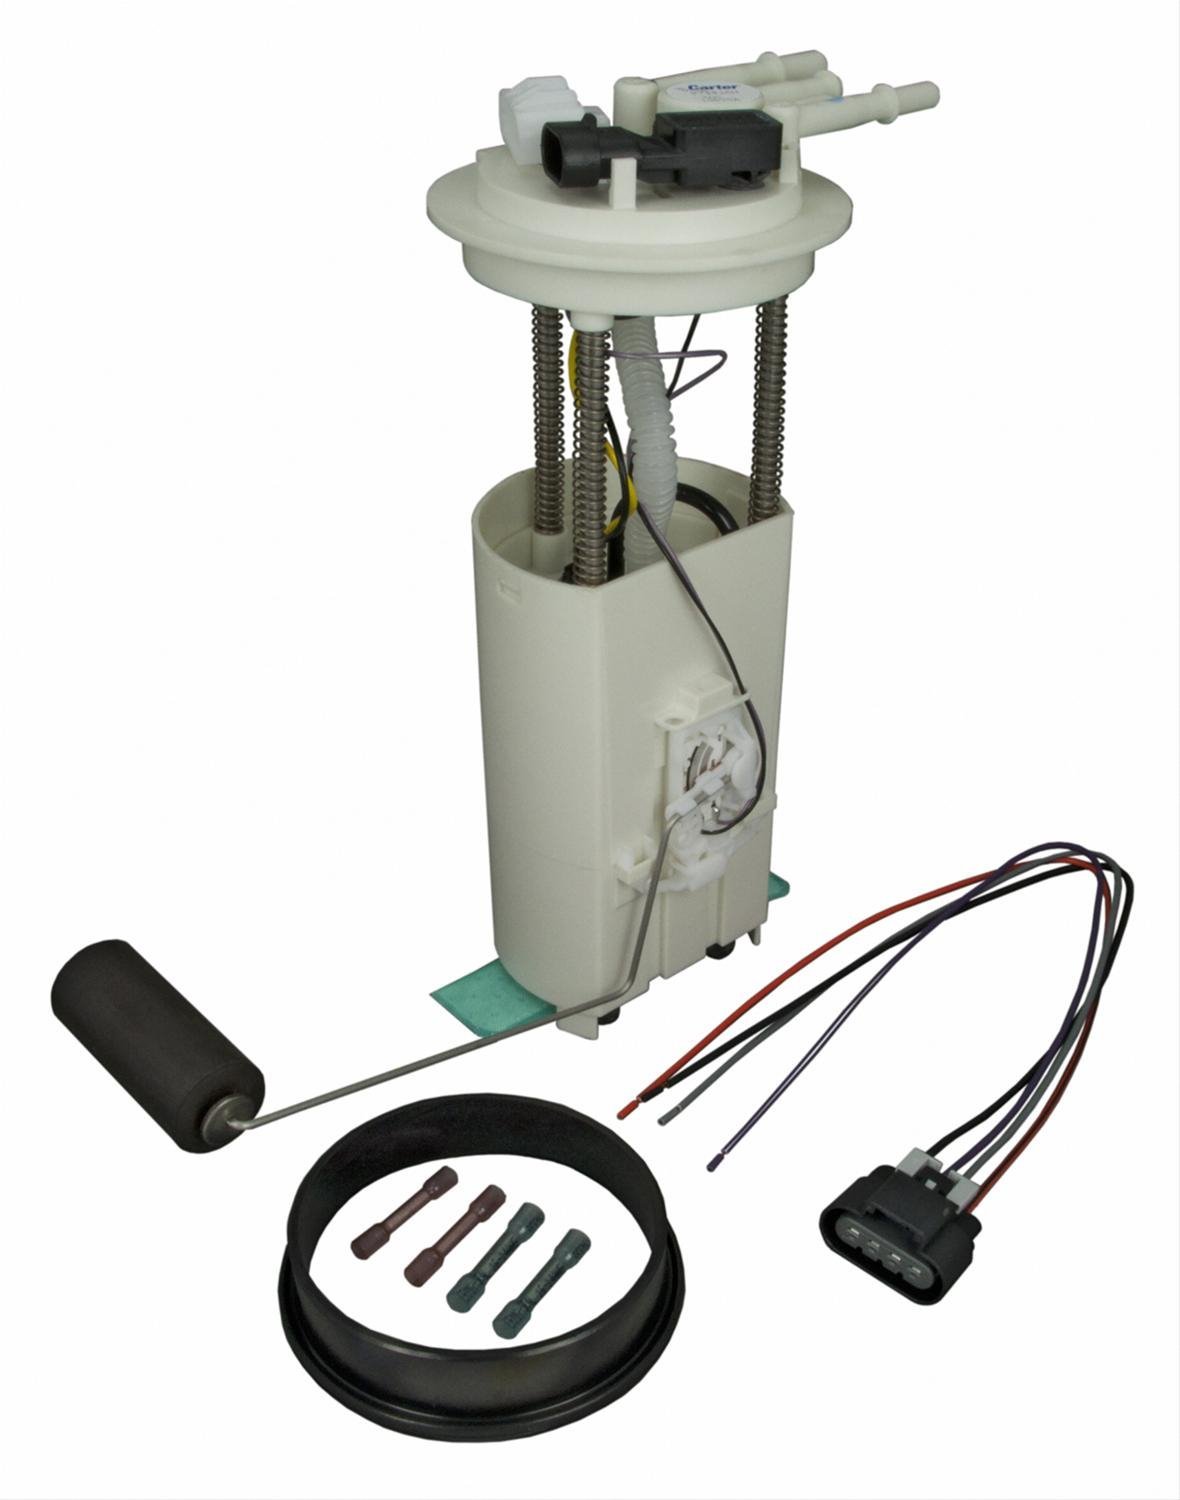 OE GM Replacement Electric Fuel Pump Module Assembly 2000-01 Chevrolet Suburban 1500 5.3L V8